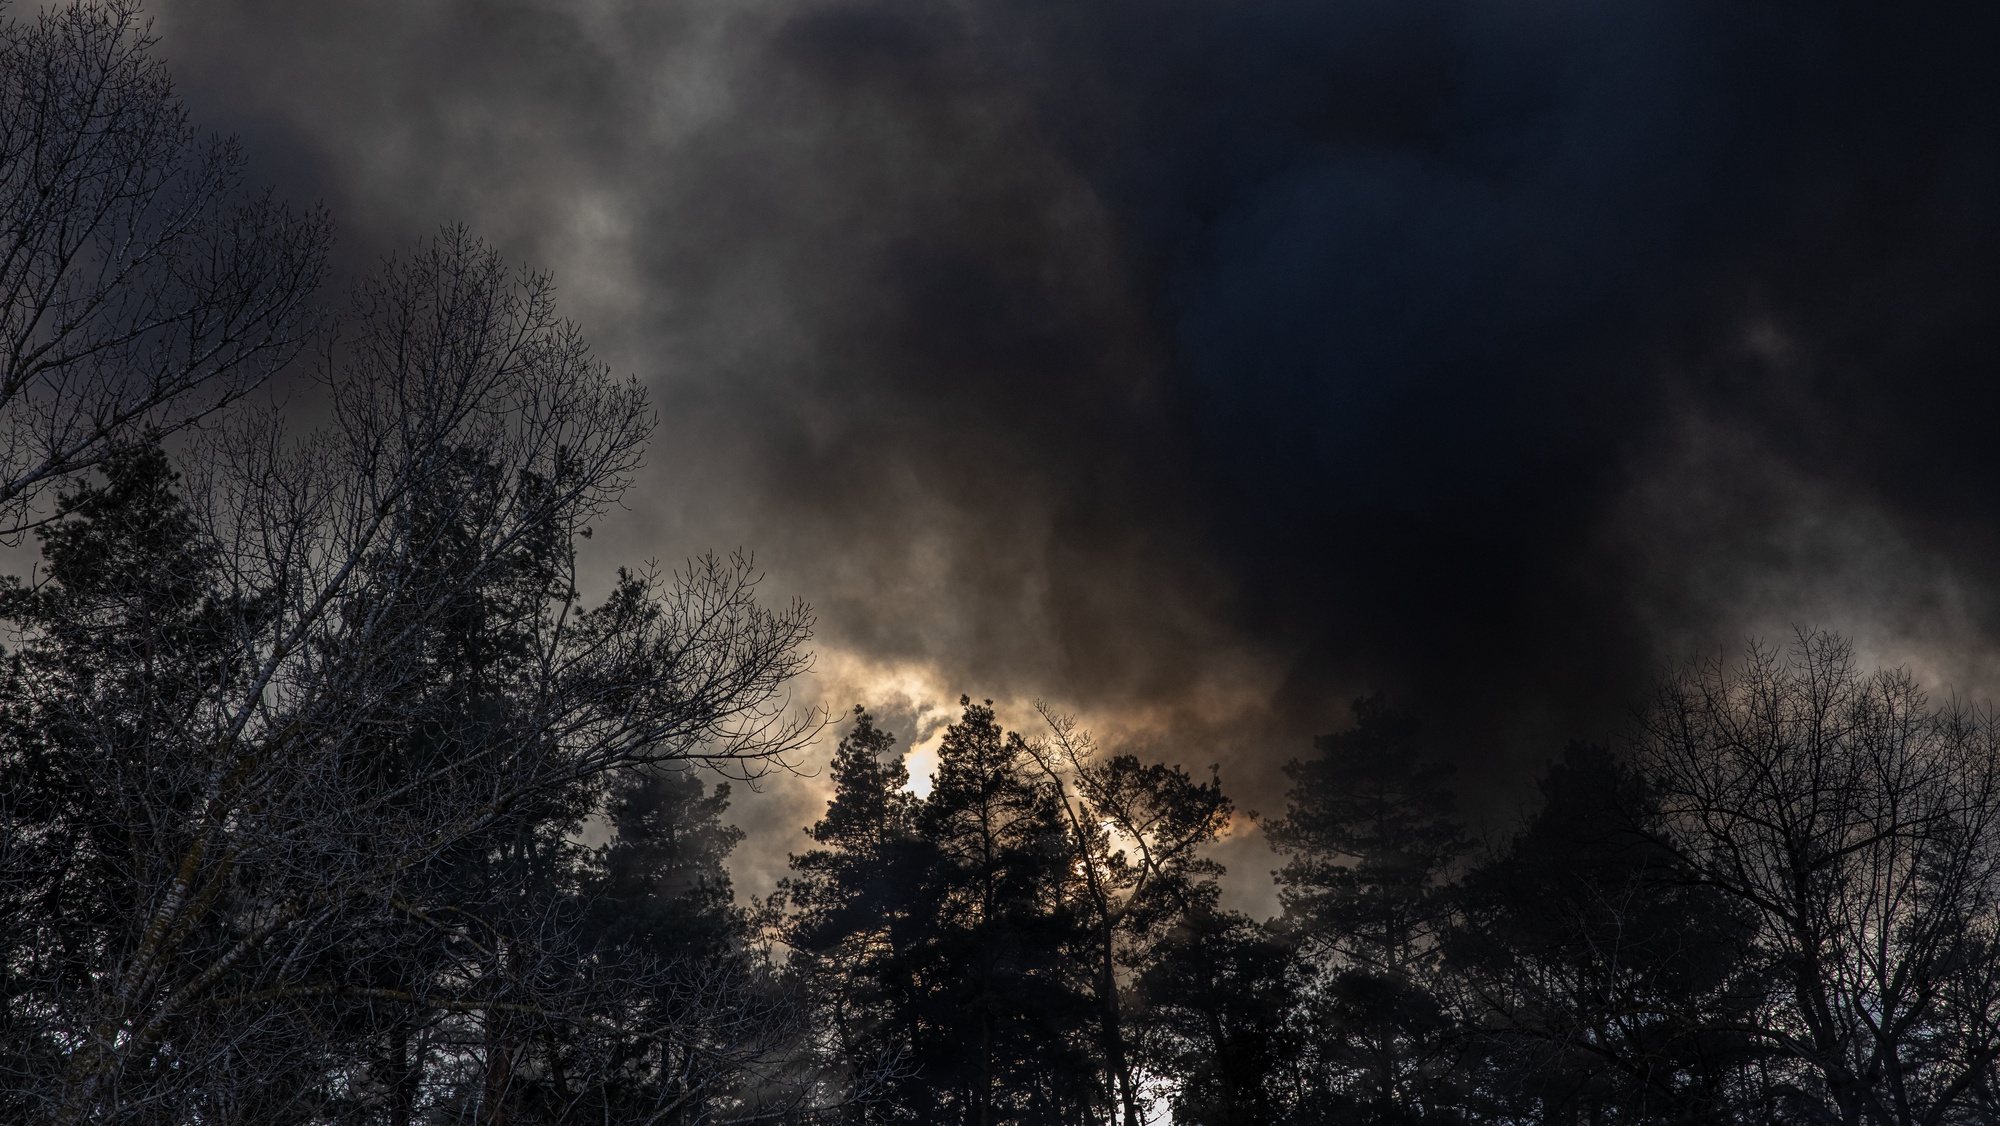 epa09810688 Smoke comes from the warehouse after falling down of a Russian Kalibr missile debris which was shot down over Kalynivka village, near Brovary, the eastern frontline of Kyiv (Kiev) region, Ukraine, 08 March 2022. According to the United Nations High Commissioner for Refugees (UNHCR), Russia&#039;s military invasion of Ukraine, which started on 24 February, has destroyed civilian infrastructure and caused civilian casualties, with tens of thousands internally displaced and over two million refugees fleeing the country.  EPA/ROMAN PILIPEY